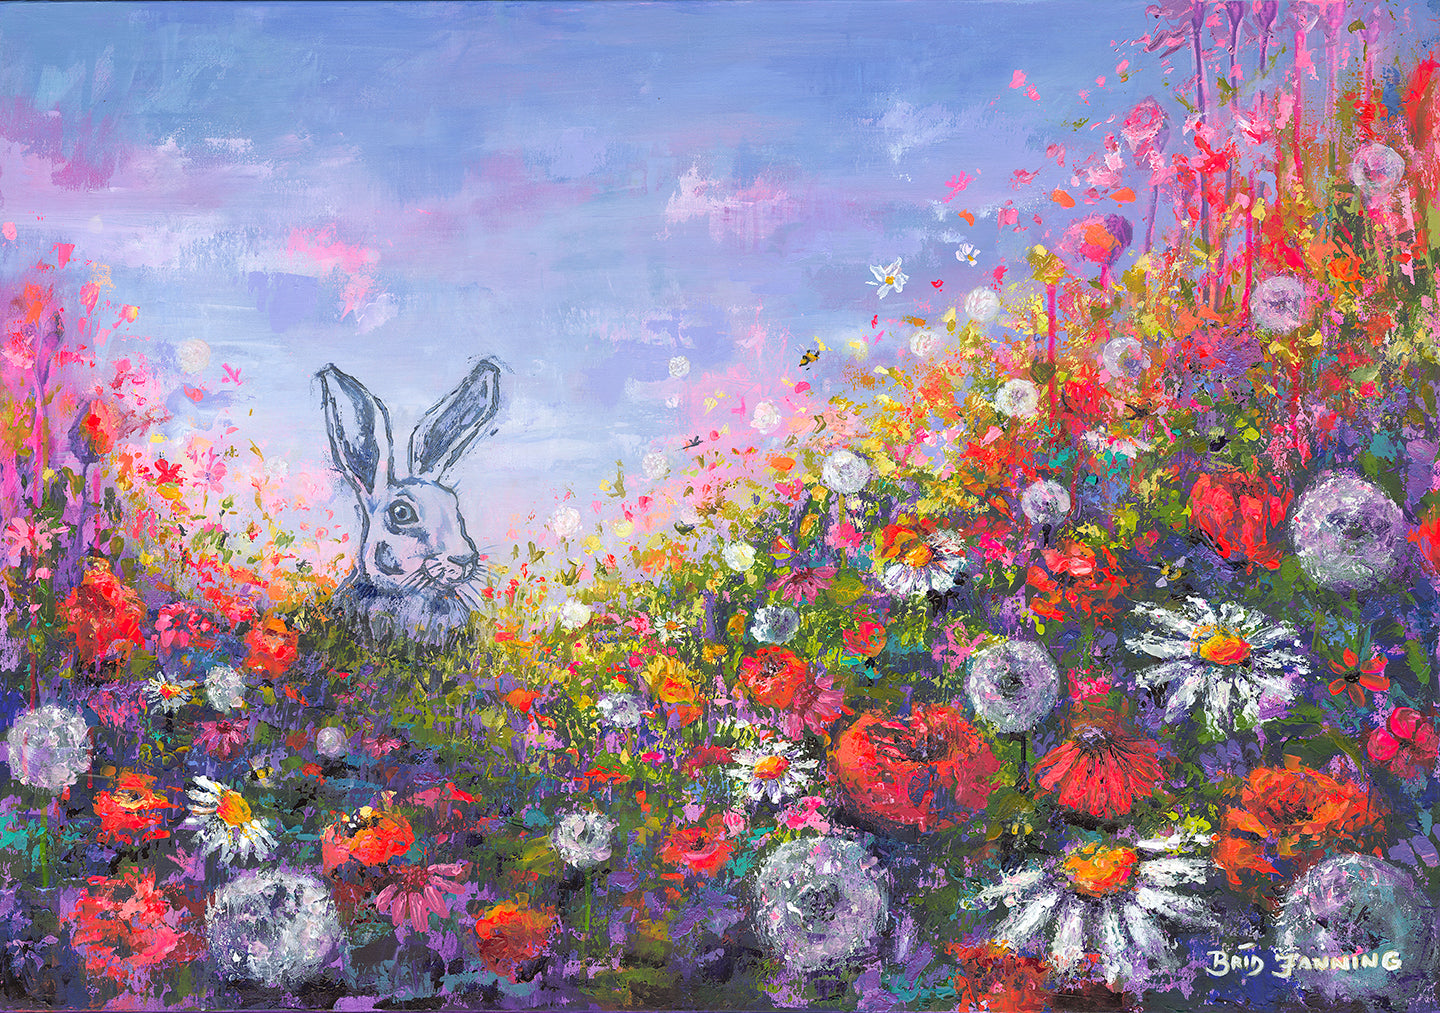 The Hare's Paradise